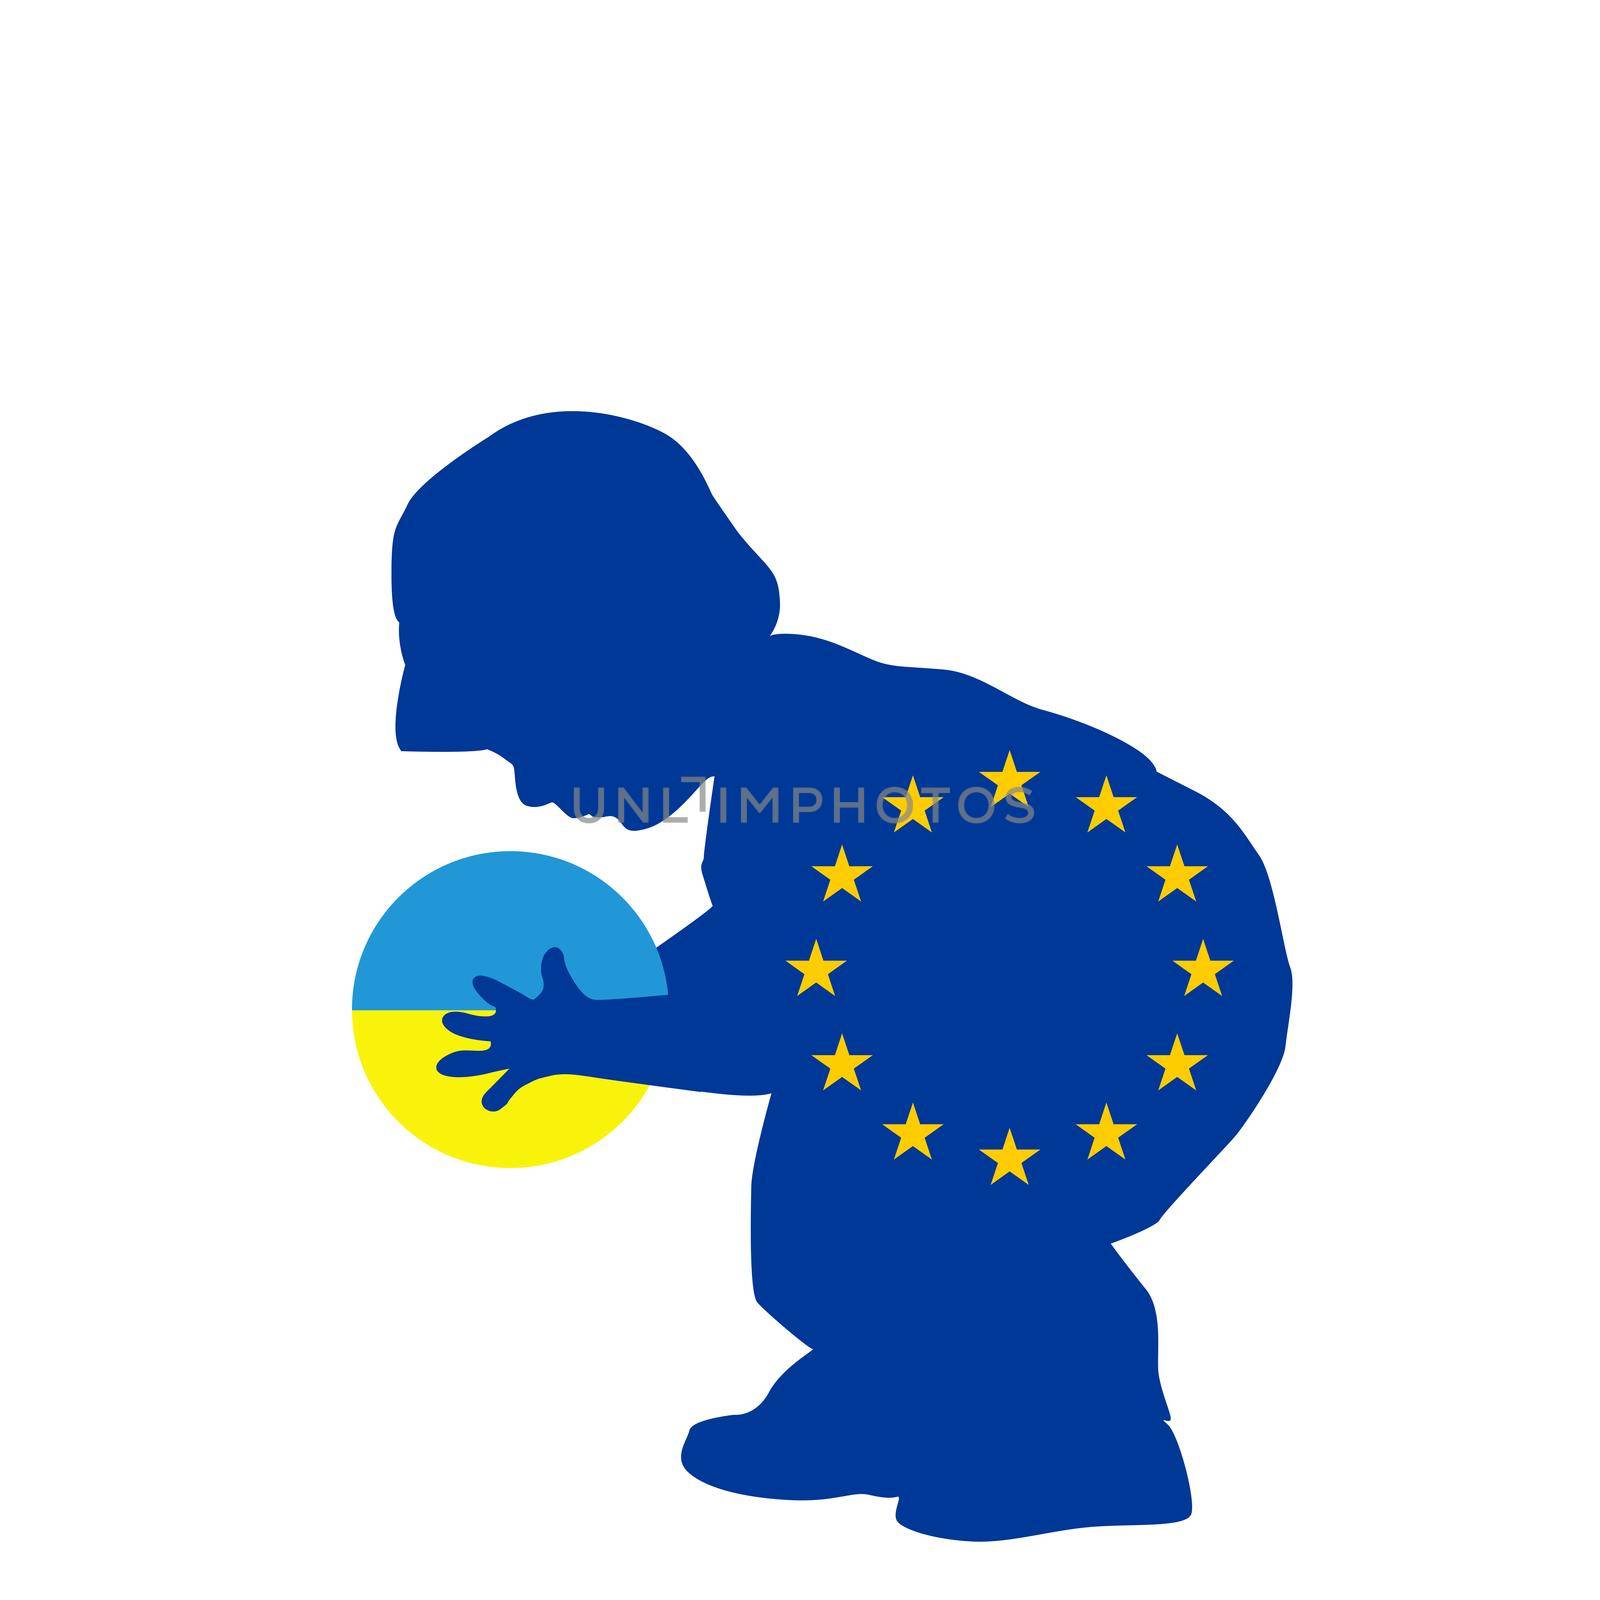 European Union helps Ukraine abstract illustration with child holding a ball colored in Ukraine flag colors by hibrida13